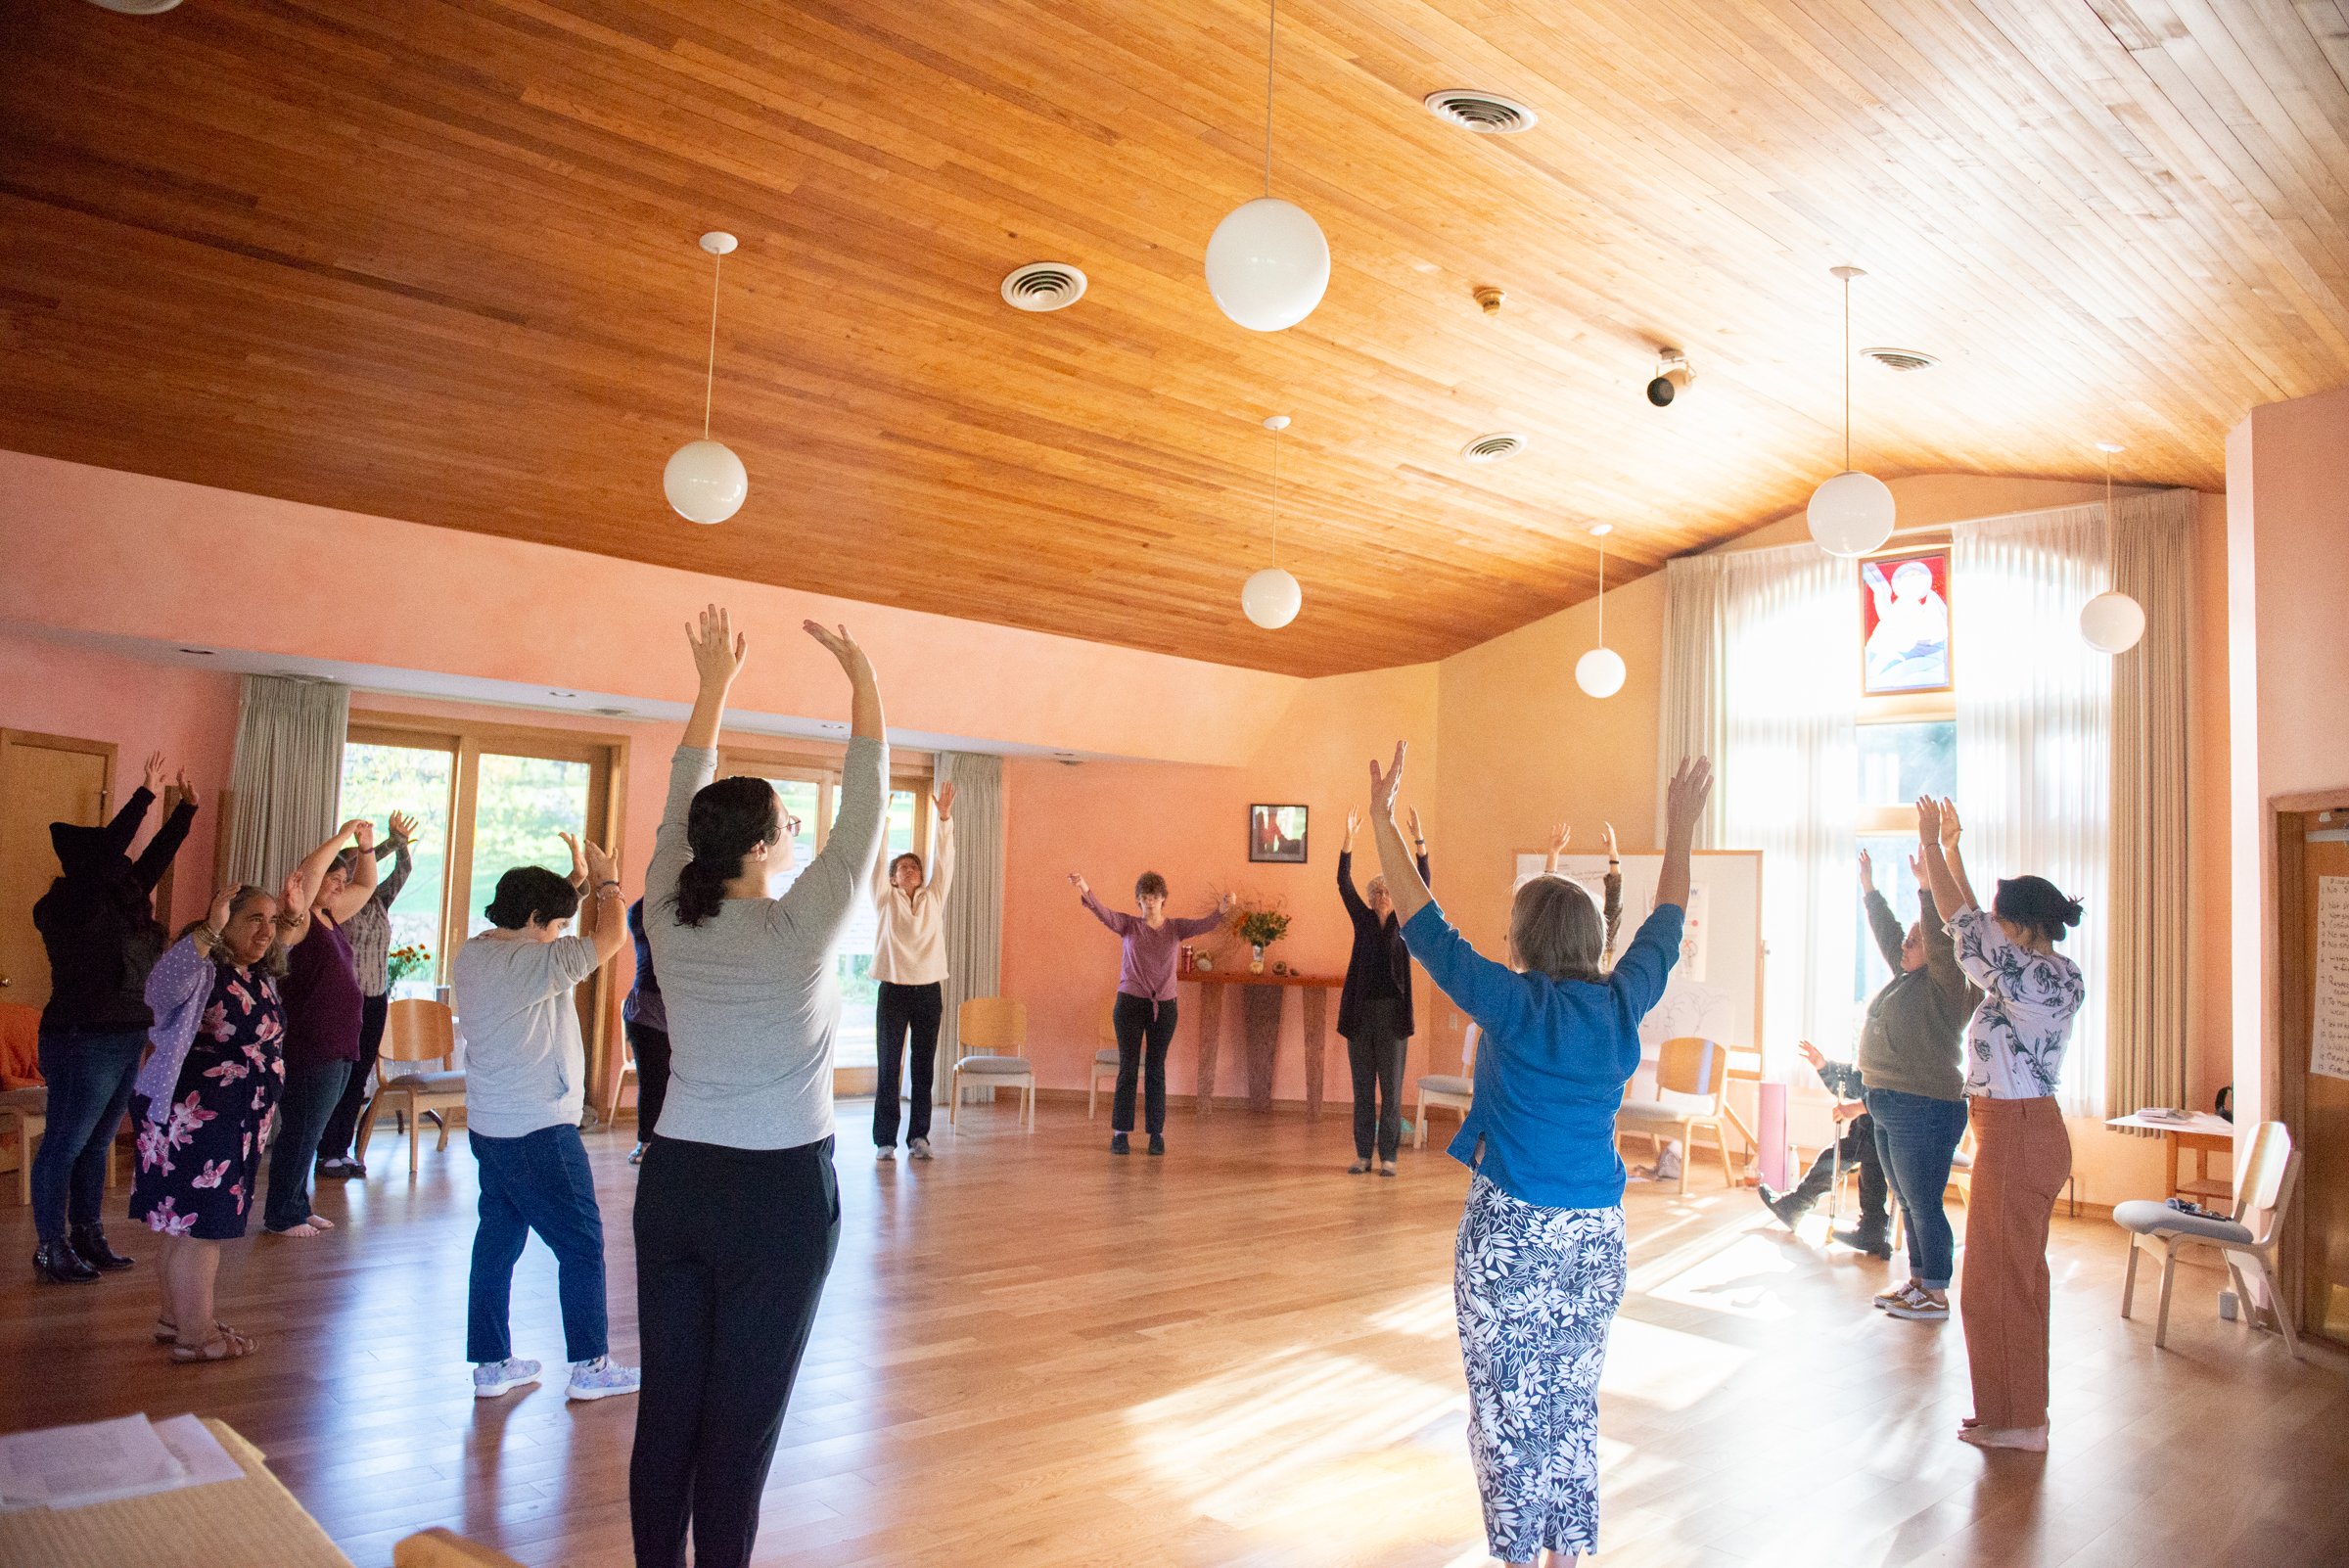 Participants in Soltane’s first Empowered Healing Immersion practicing movement in the style of eurythmy, a healing form of movement developed by Rudolf Steiner. 